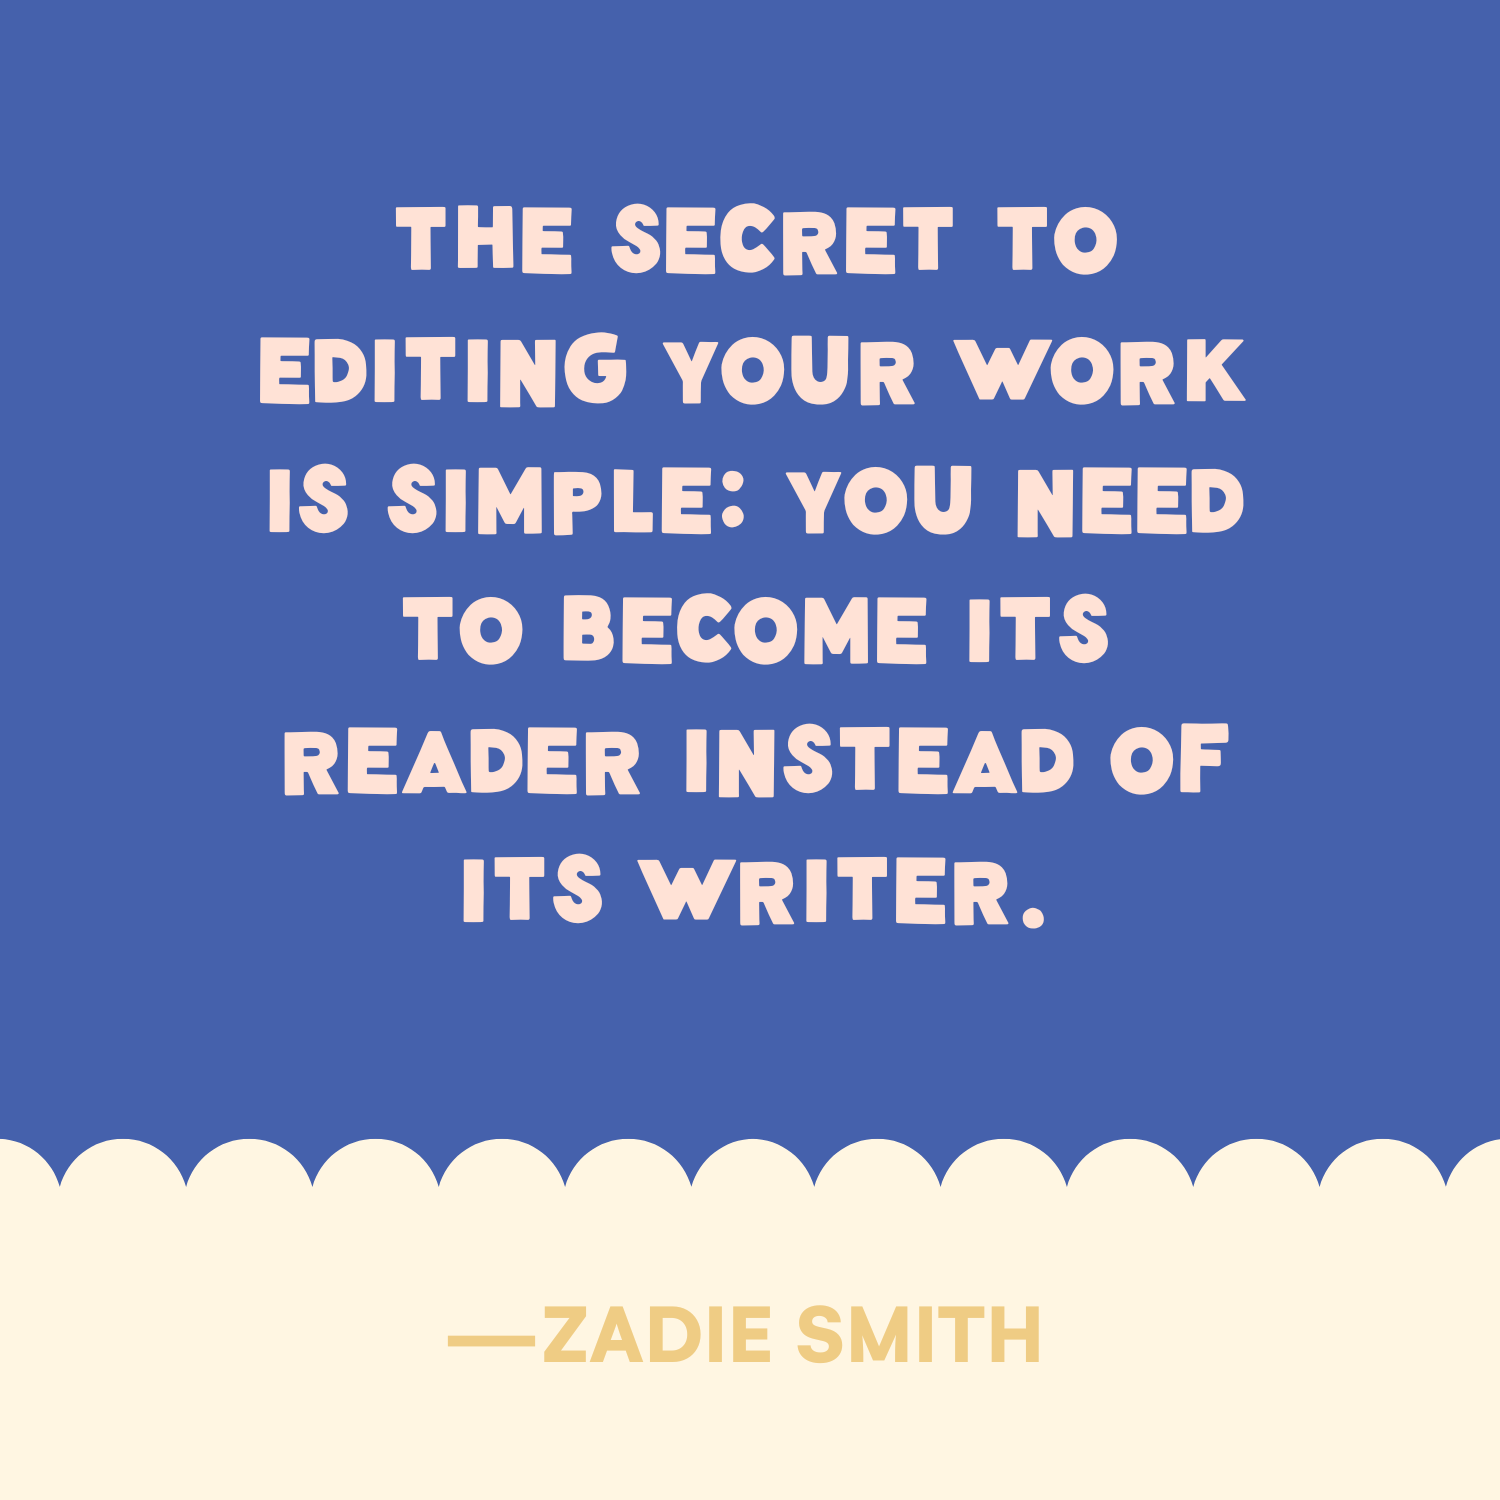 <p>"The secret to editing your work is simple: you need to become its reader instead of its writer." —Zadie Smith</p><p>Like Brit + Co's content? <a href="https://www.msn.com/en-us/channel/source/BRITCO/sr-vid-mwh45mxjpbgutp55qr3ca3bnmhxae80xpqj0vw80yesb5g0h5q2a?cvid=6efac0aec71d460989f862c7f33ea985&ei=106">Be sure to follow us for more! </a> </p>